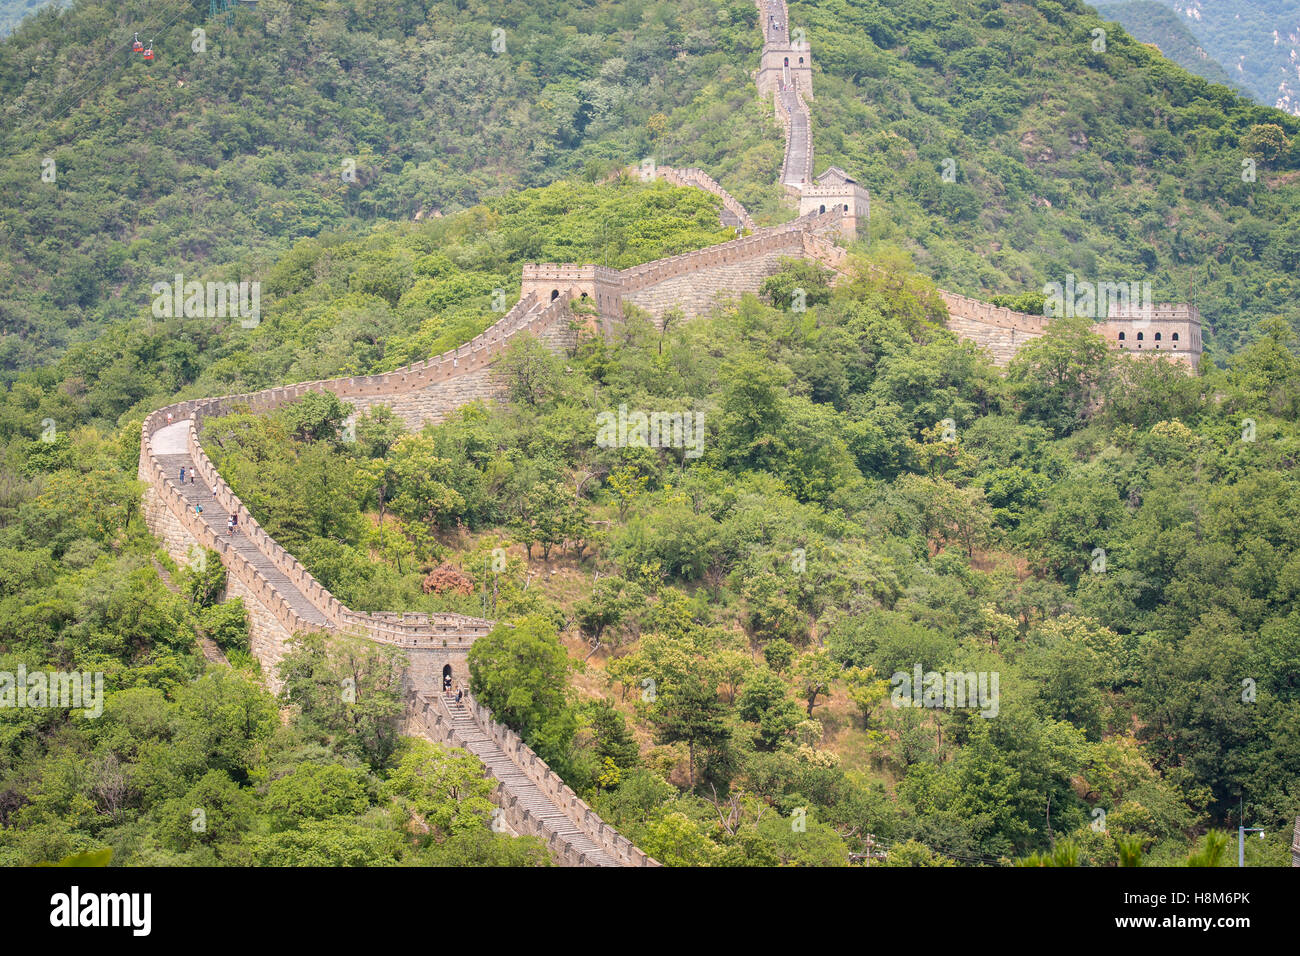 Mutianyu, China - Landscape view of the Great Wall of China. The wall stretches over 6,000 mountainous kilometers east to west a Stock Photo